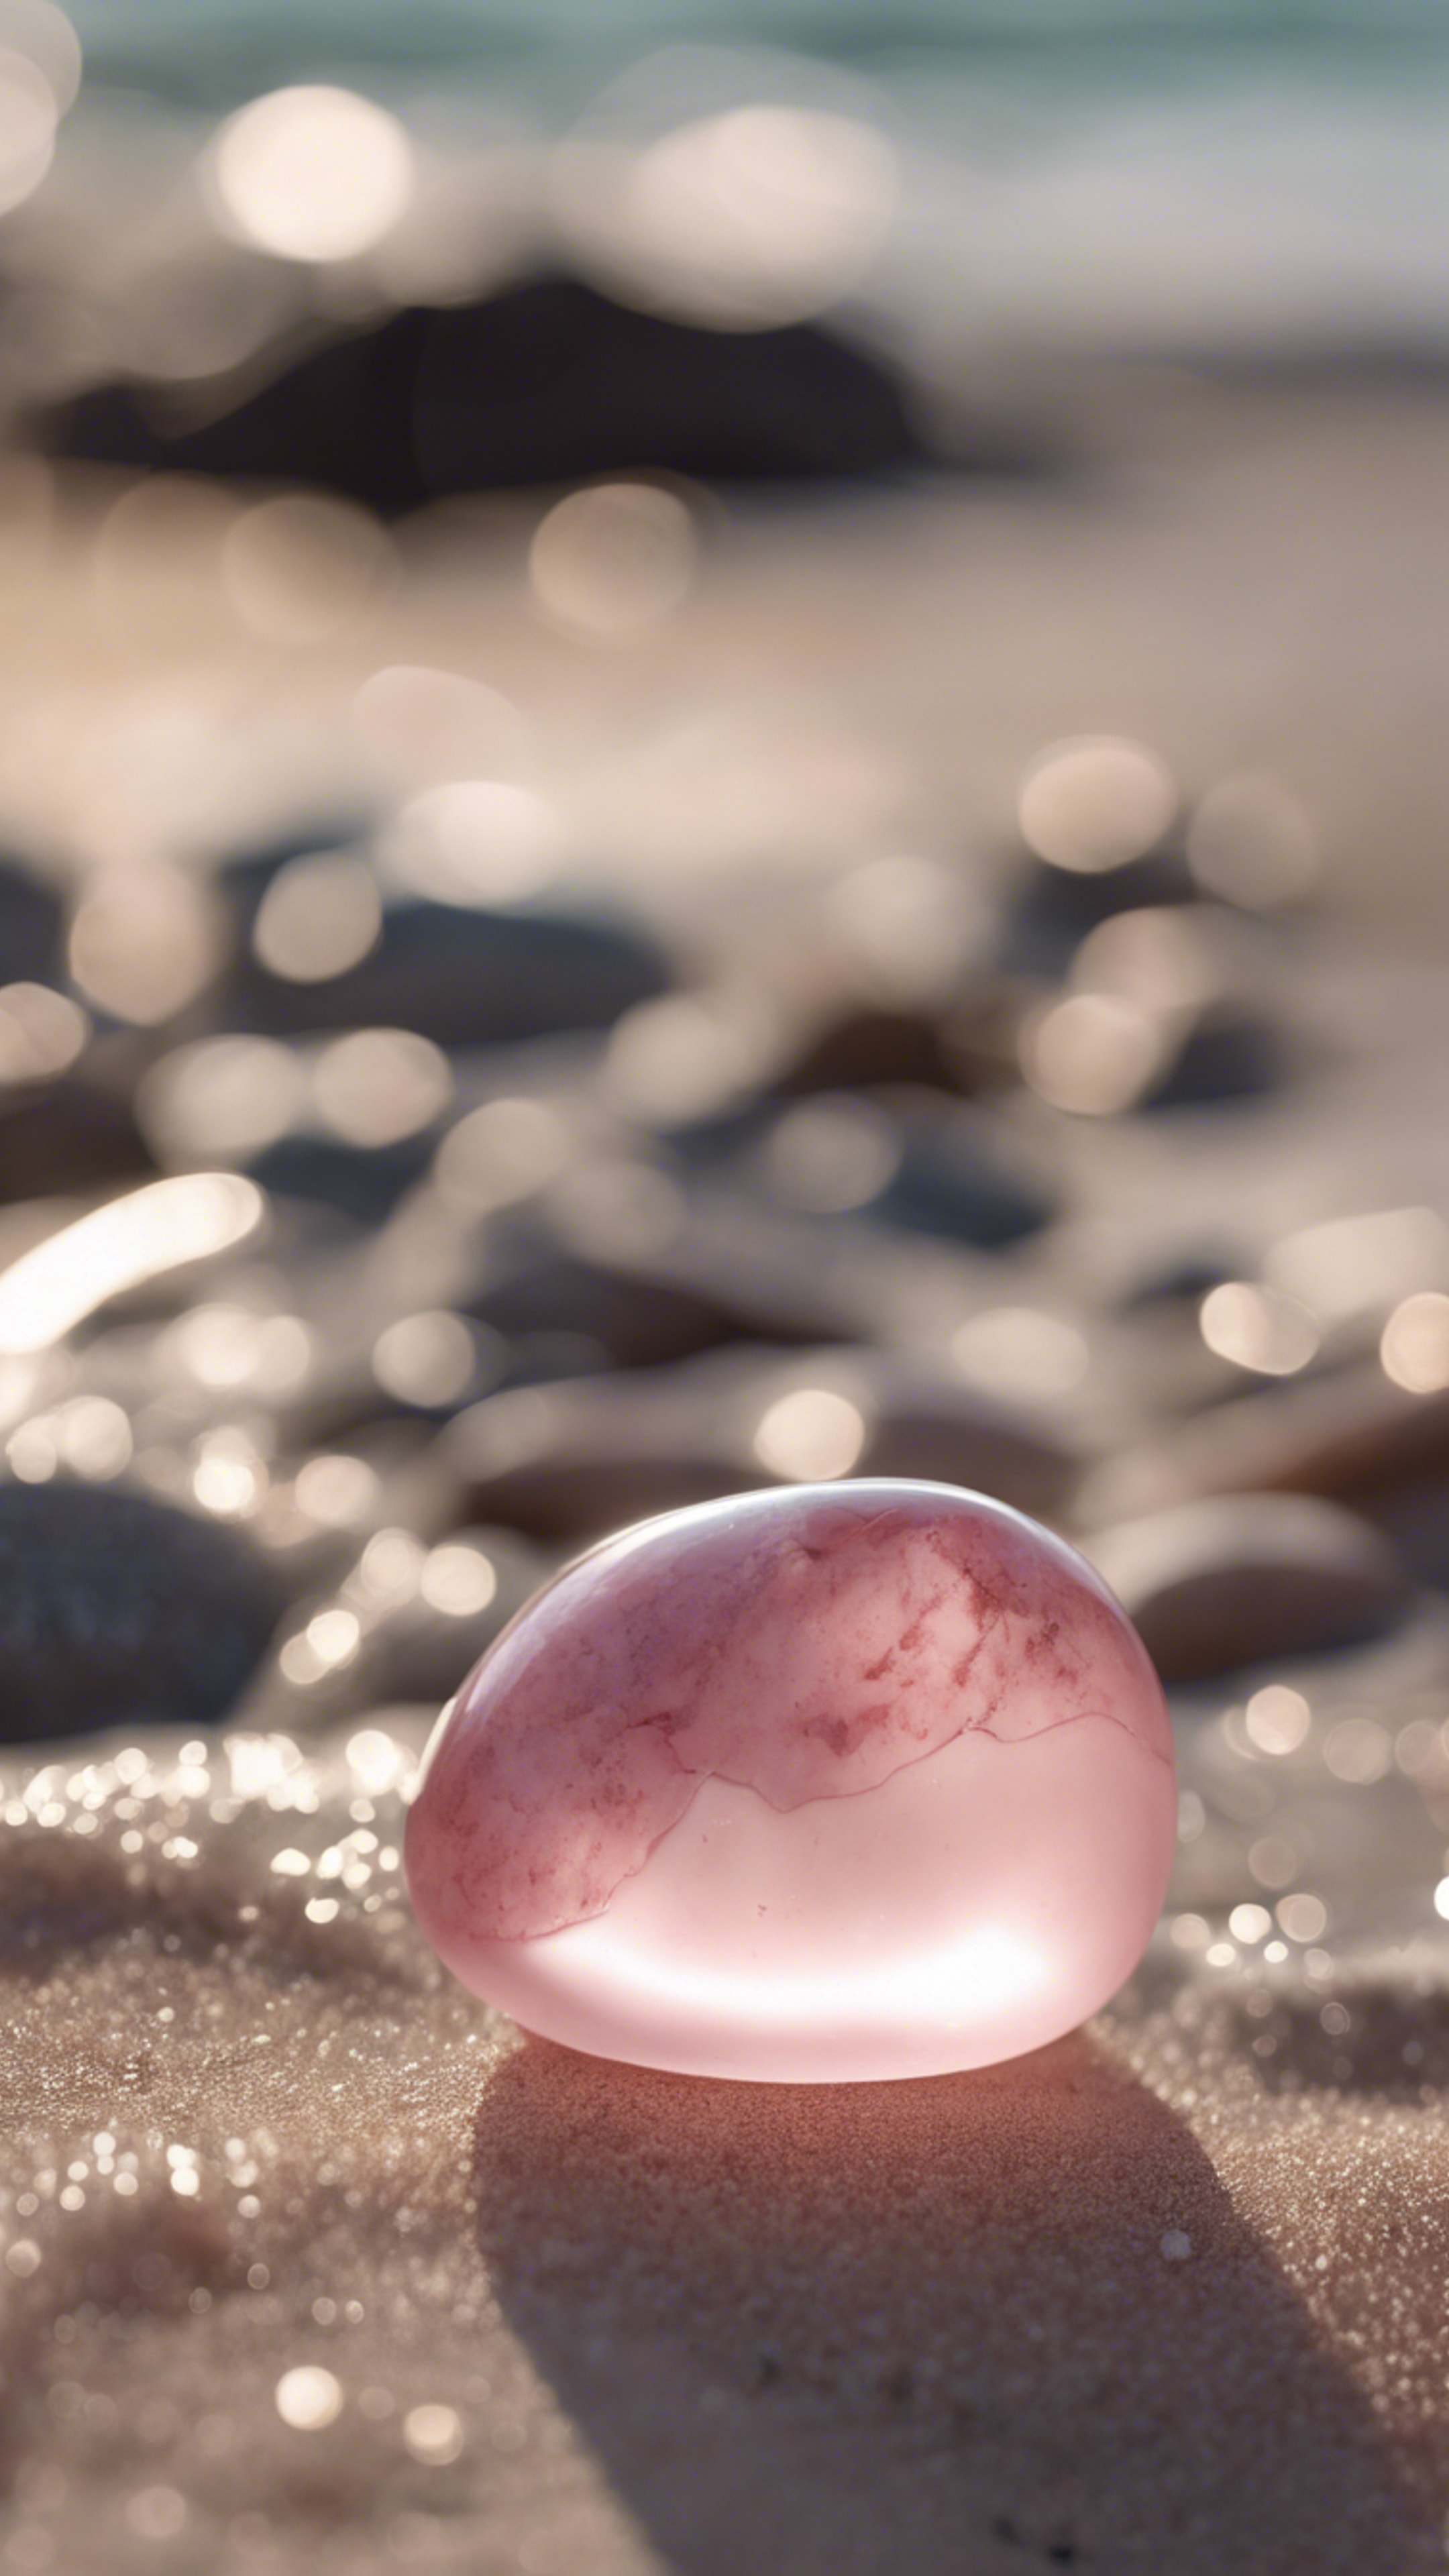 A small, smooth, pink marble pebble lying on the beach with waves gently washing over it.壁紙[a34d28fca6fa4e0f89e5]